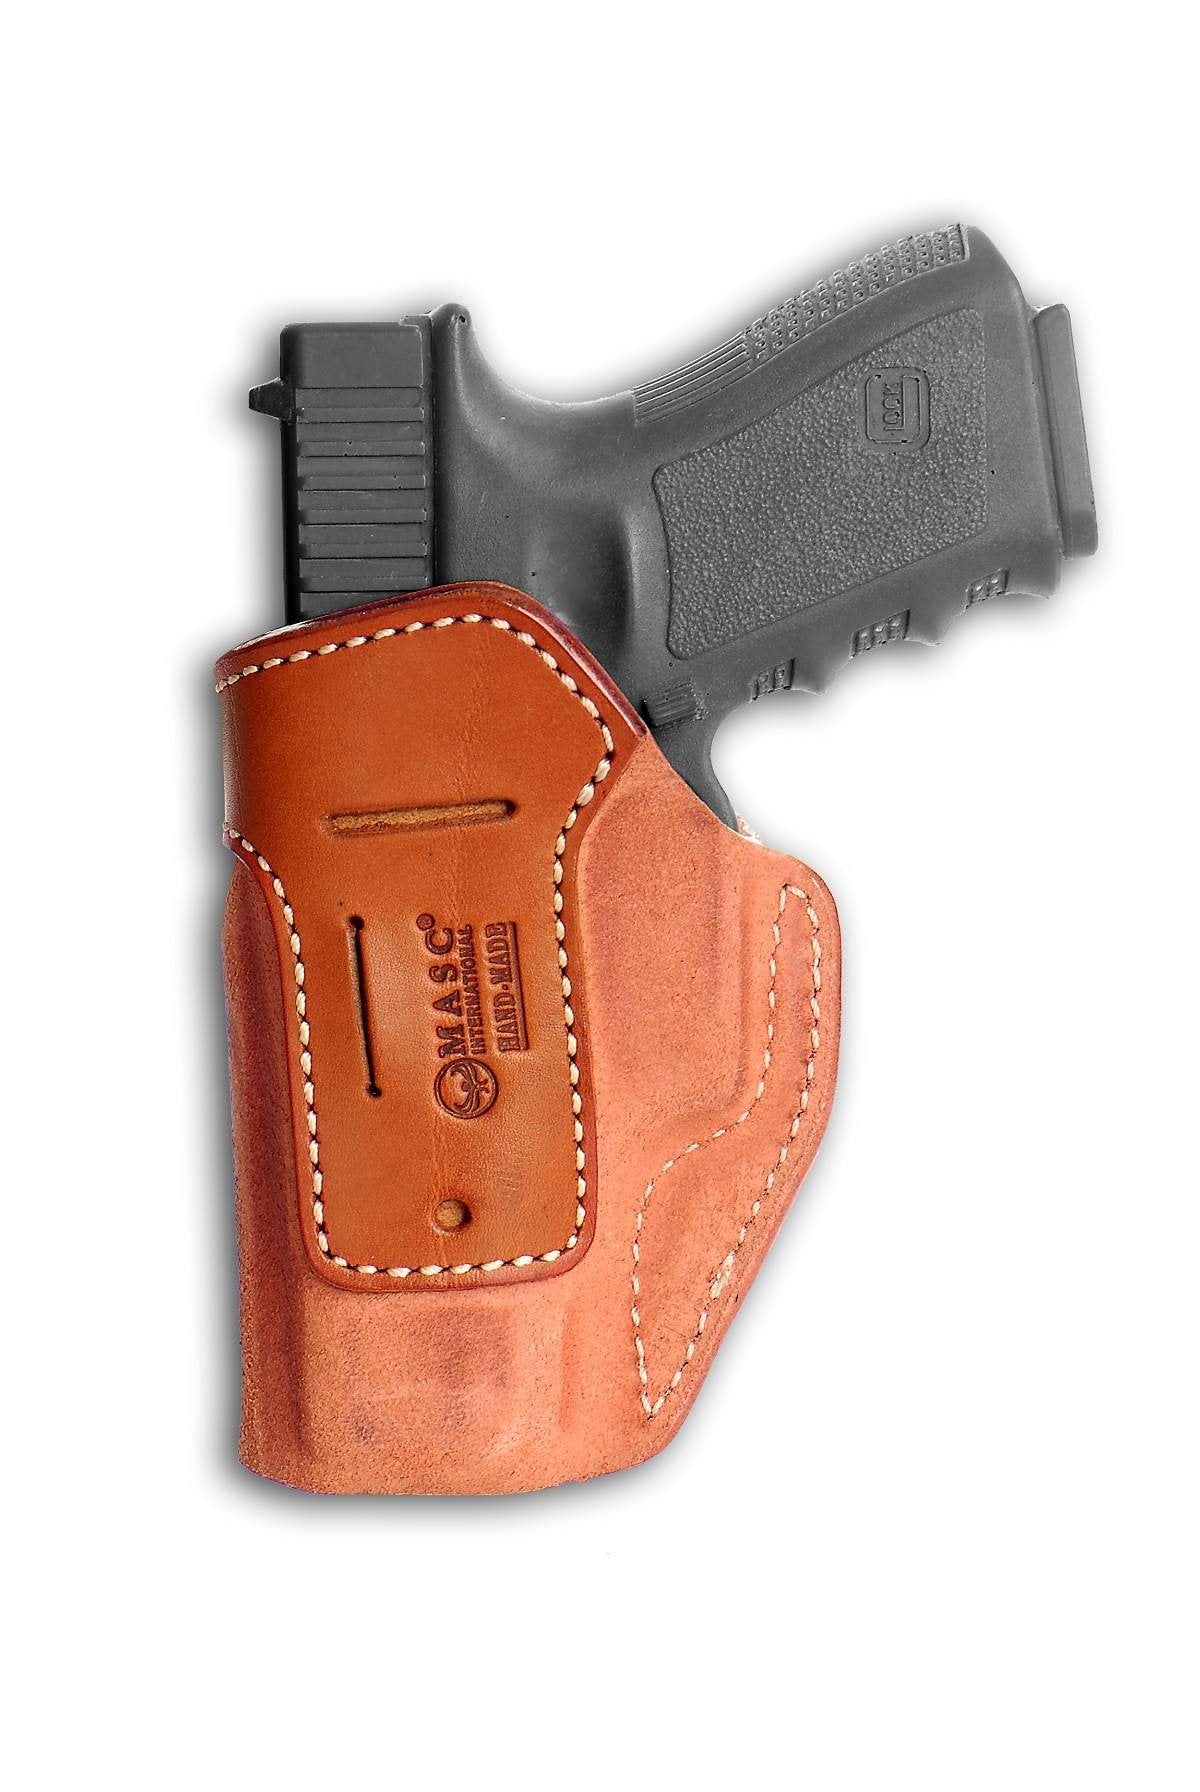 Leather Inside The Waist Band (IWB) Concealment Holster